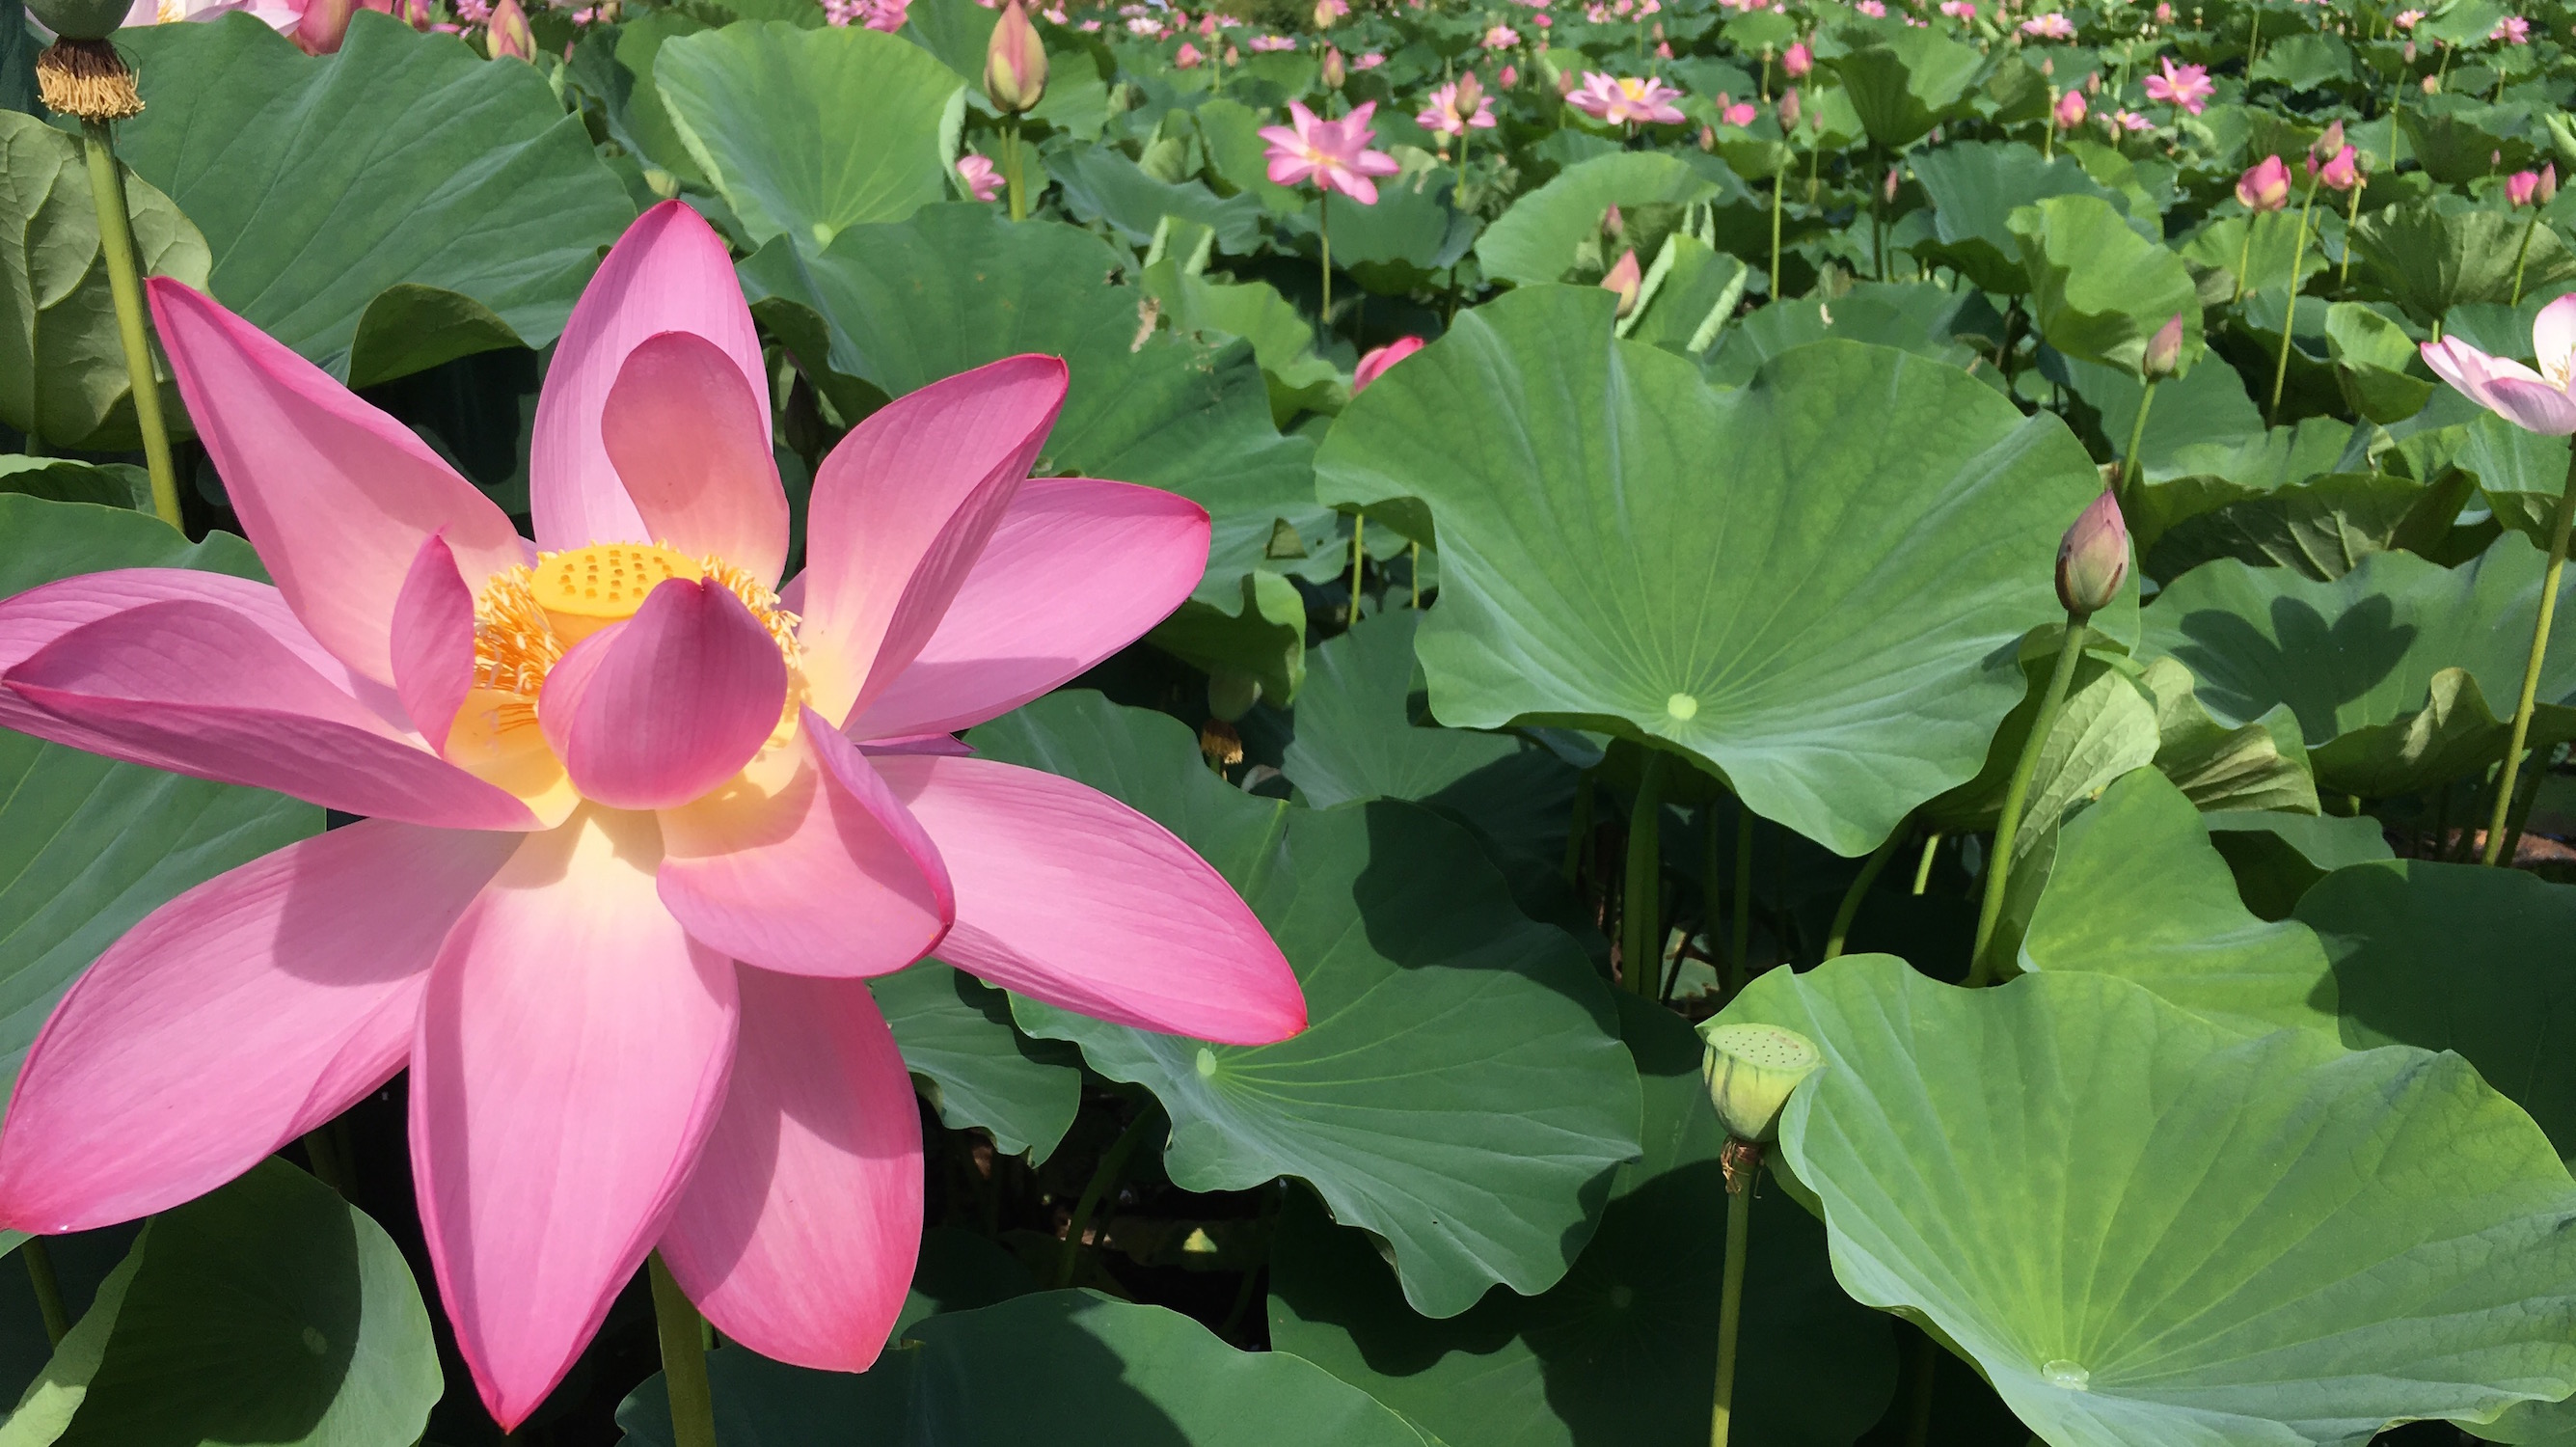 How to Grow a Lotus from Seed - Friends of Kenilworth Aquatic Gardens